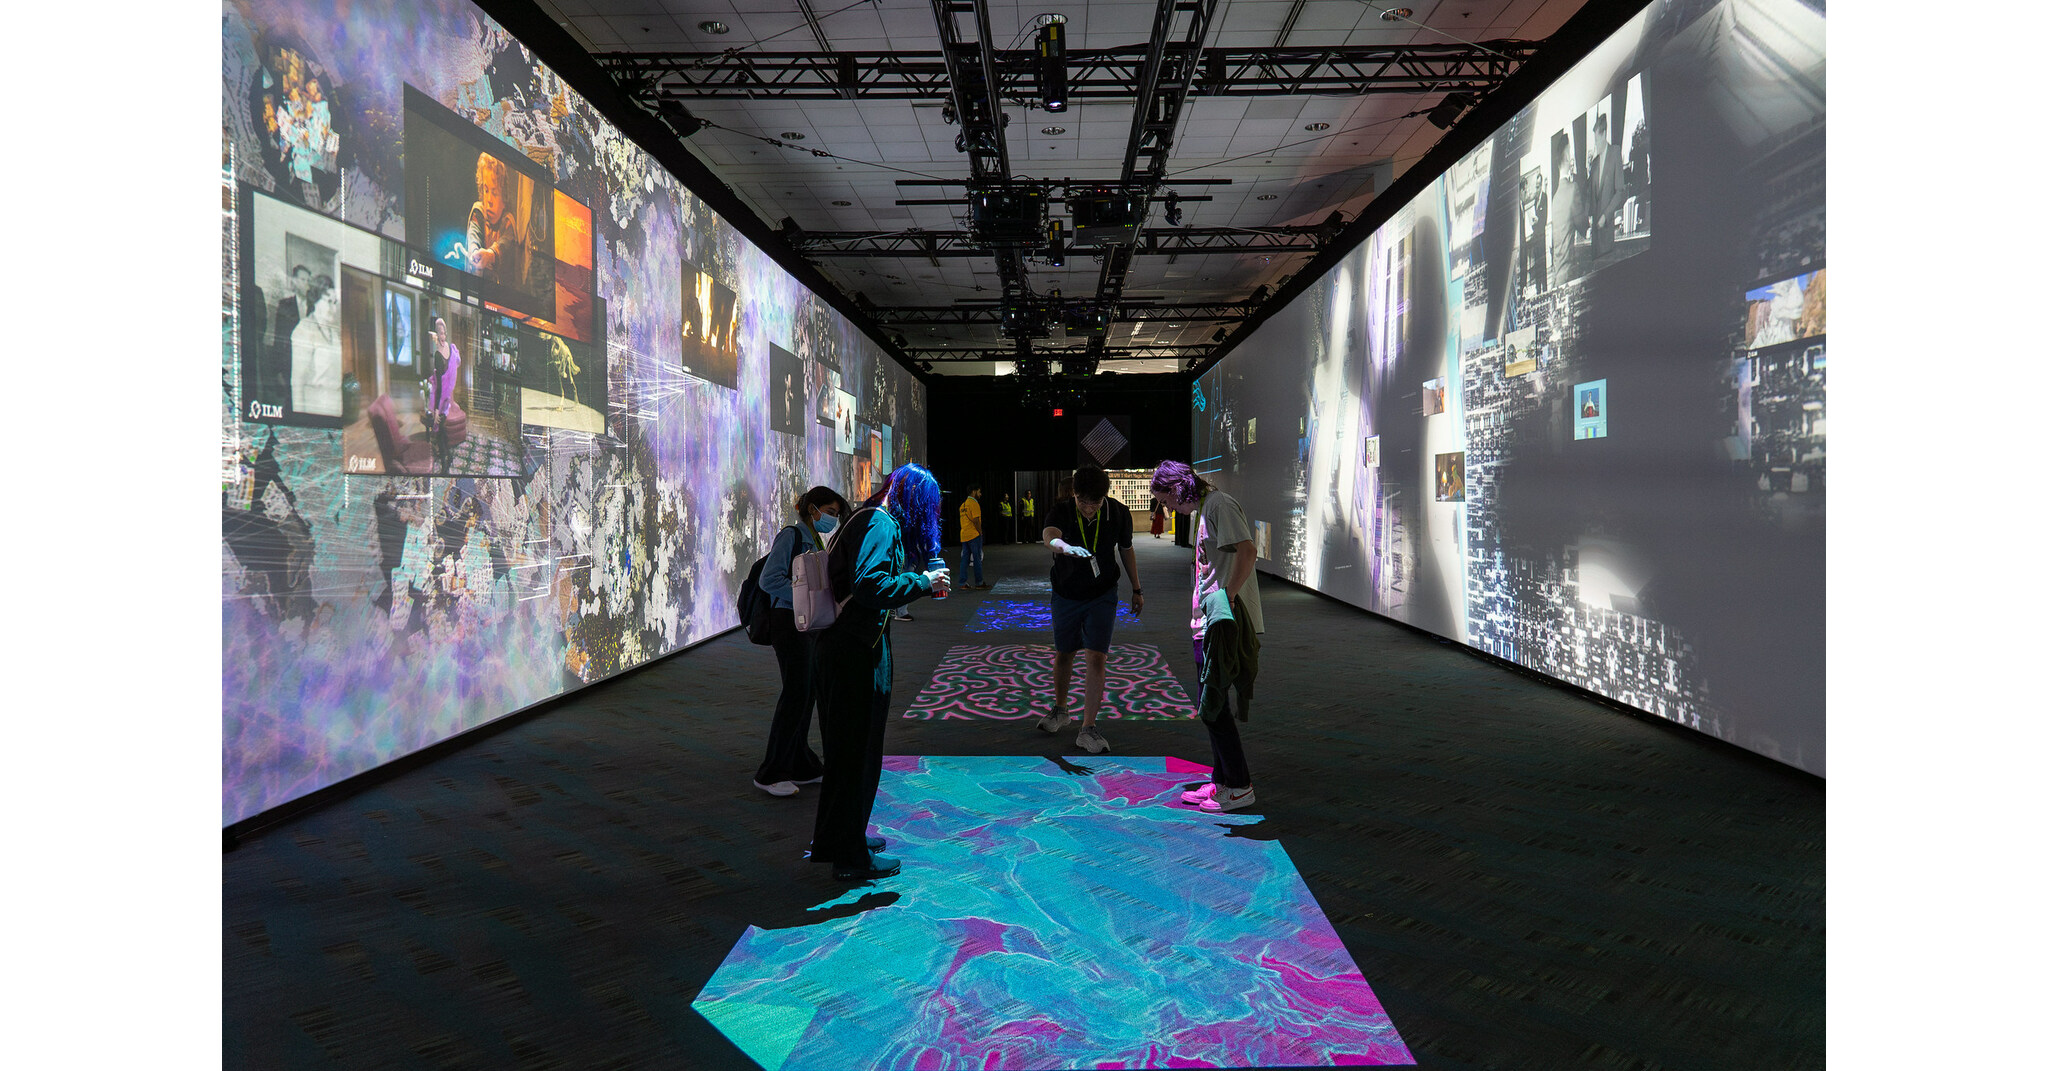 SIGGRAPH 2023 Conference Commemorates 50 Years of Innovations With Growth in Contributed Works and In-person Attendees